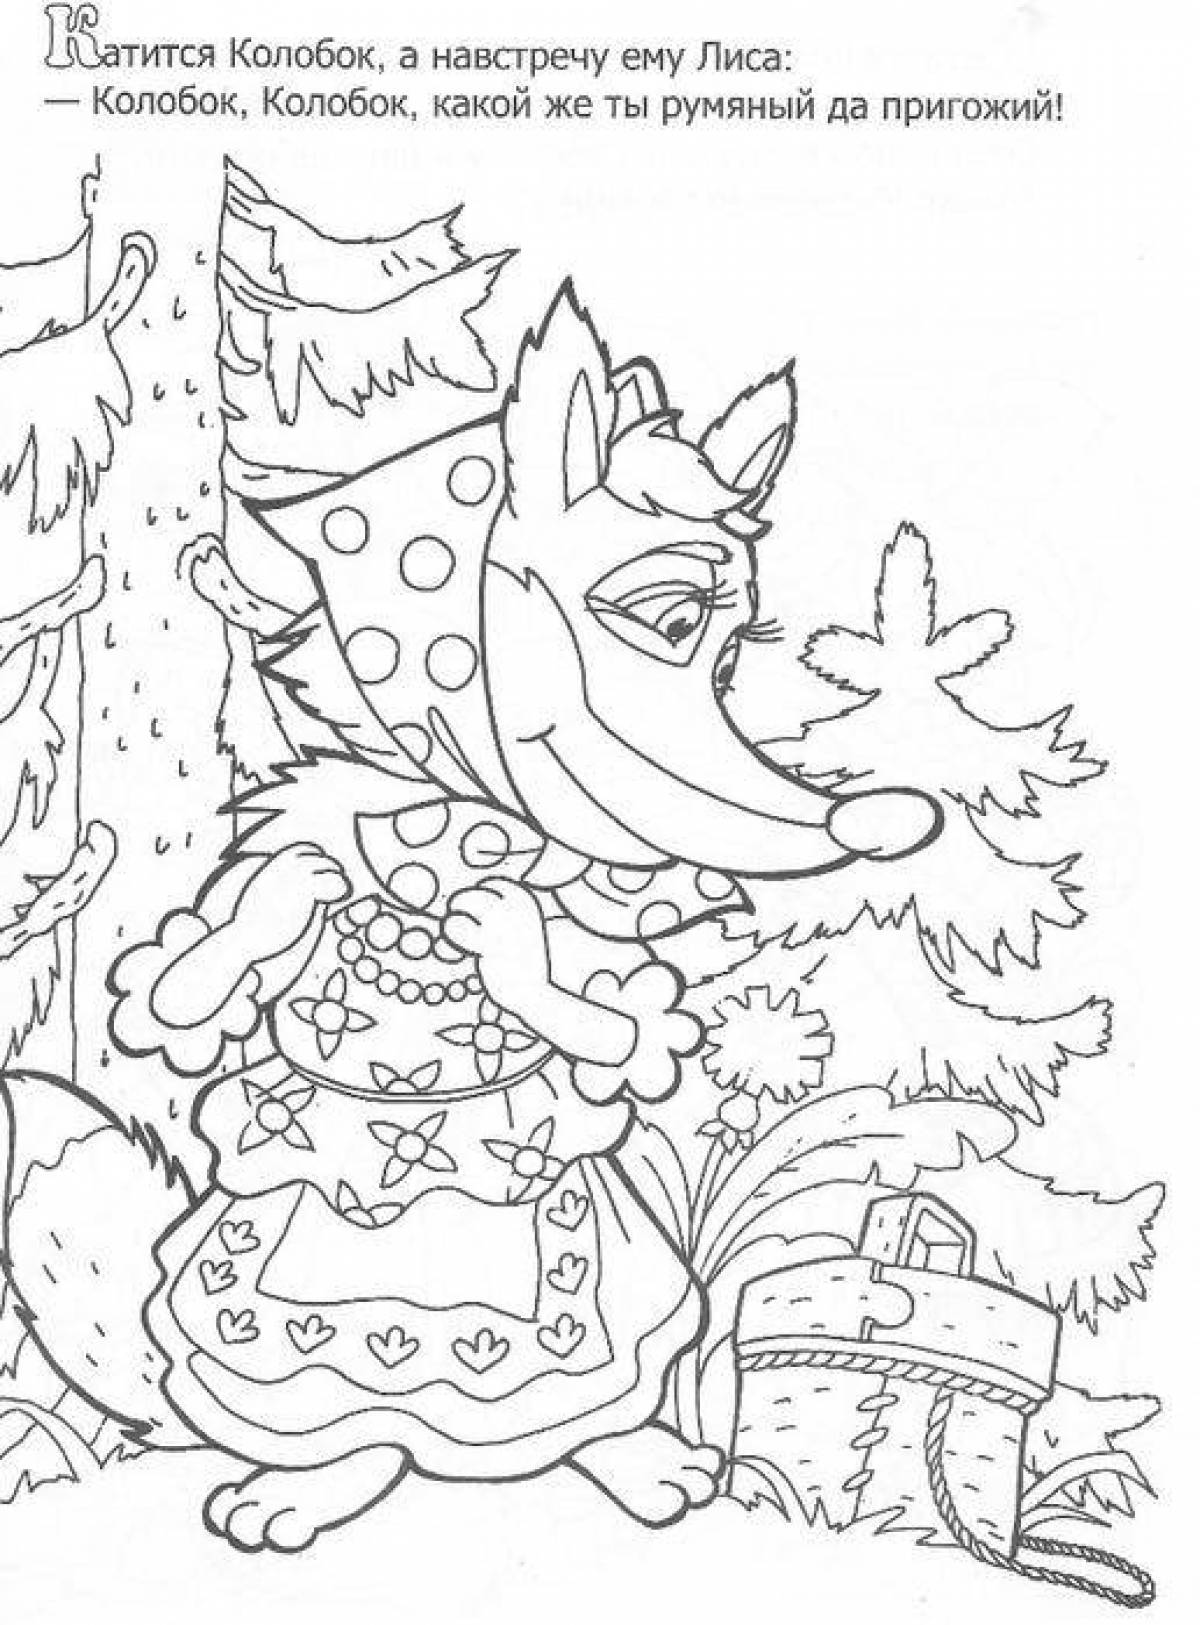 Delightful fox and rabbit coloring book